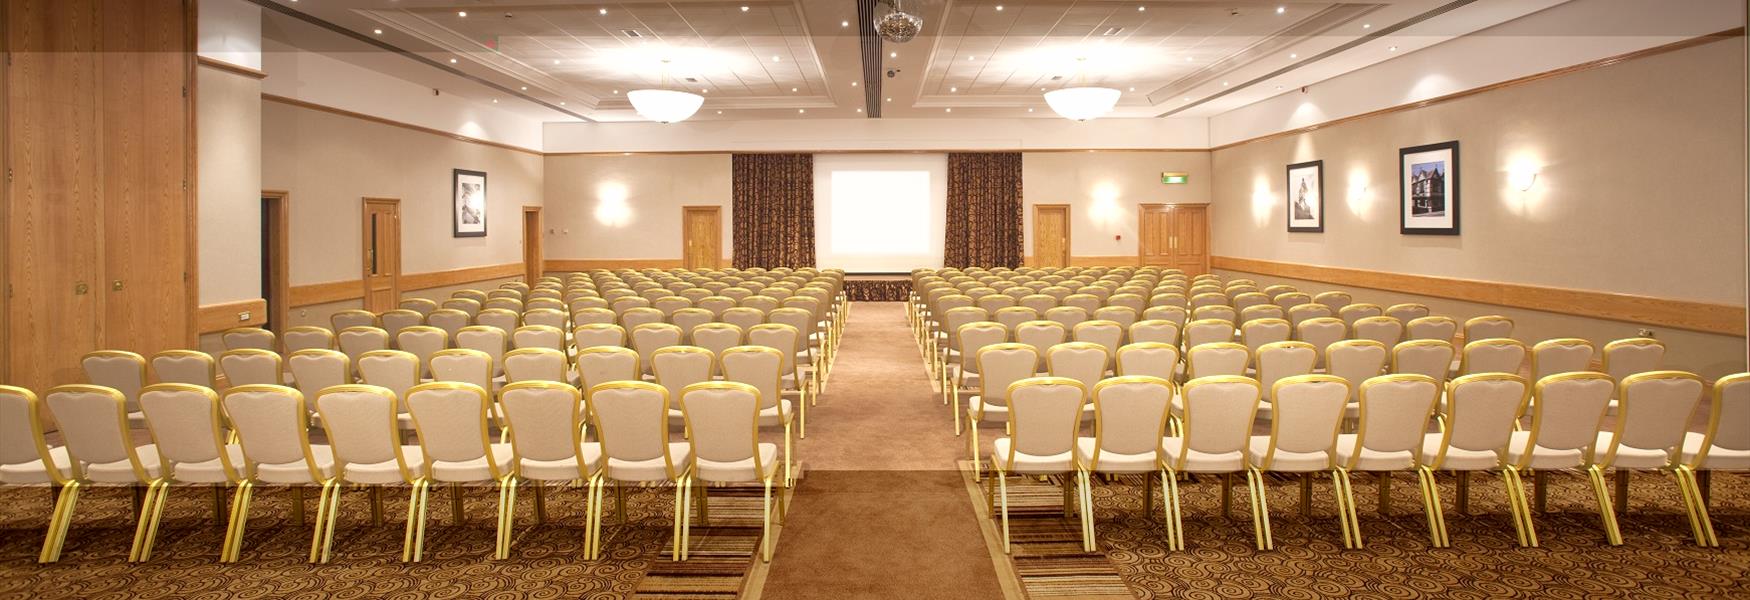 Meetings and Events at the Crowne Plaza Hotel, Chester